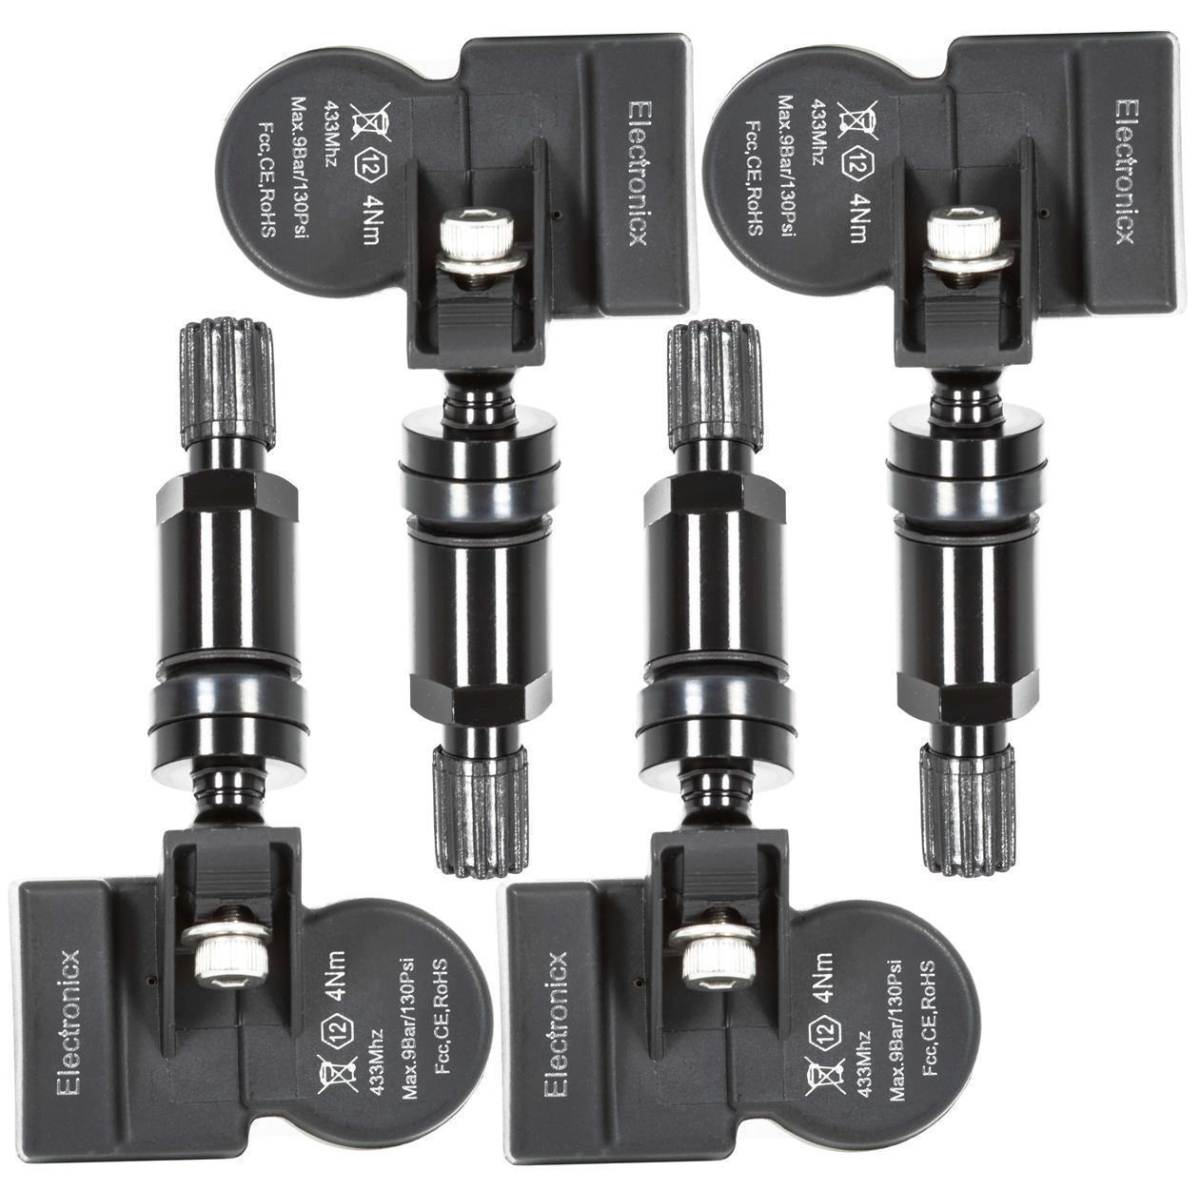 4x TPMS Tire Pressure Sensors Metal Valve Black for Land Rover Discovery Sport